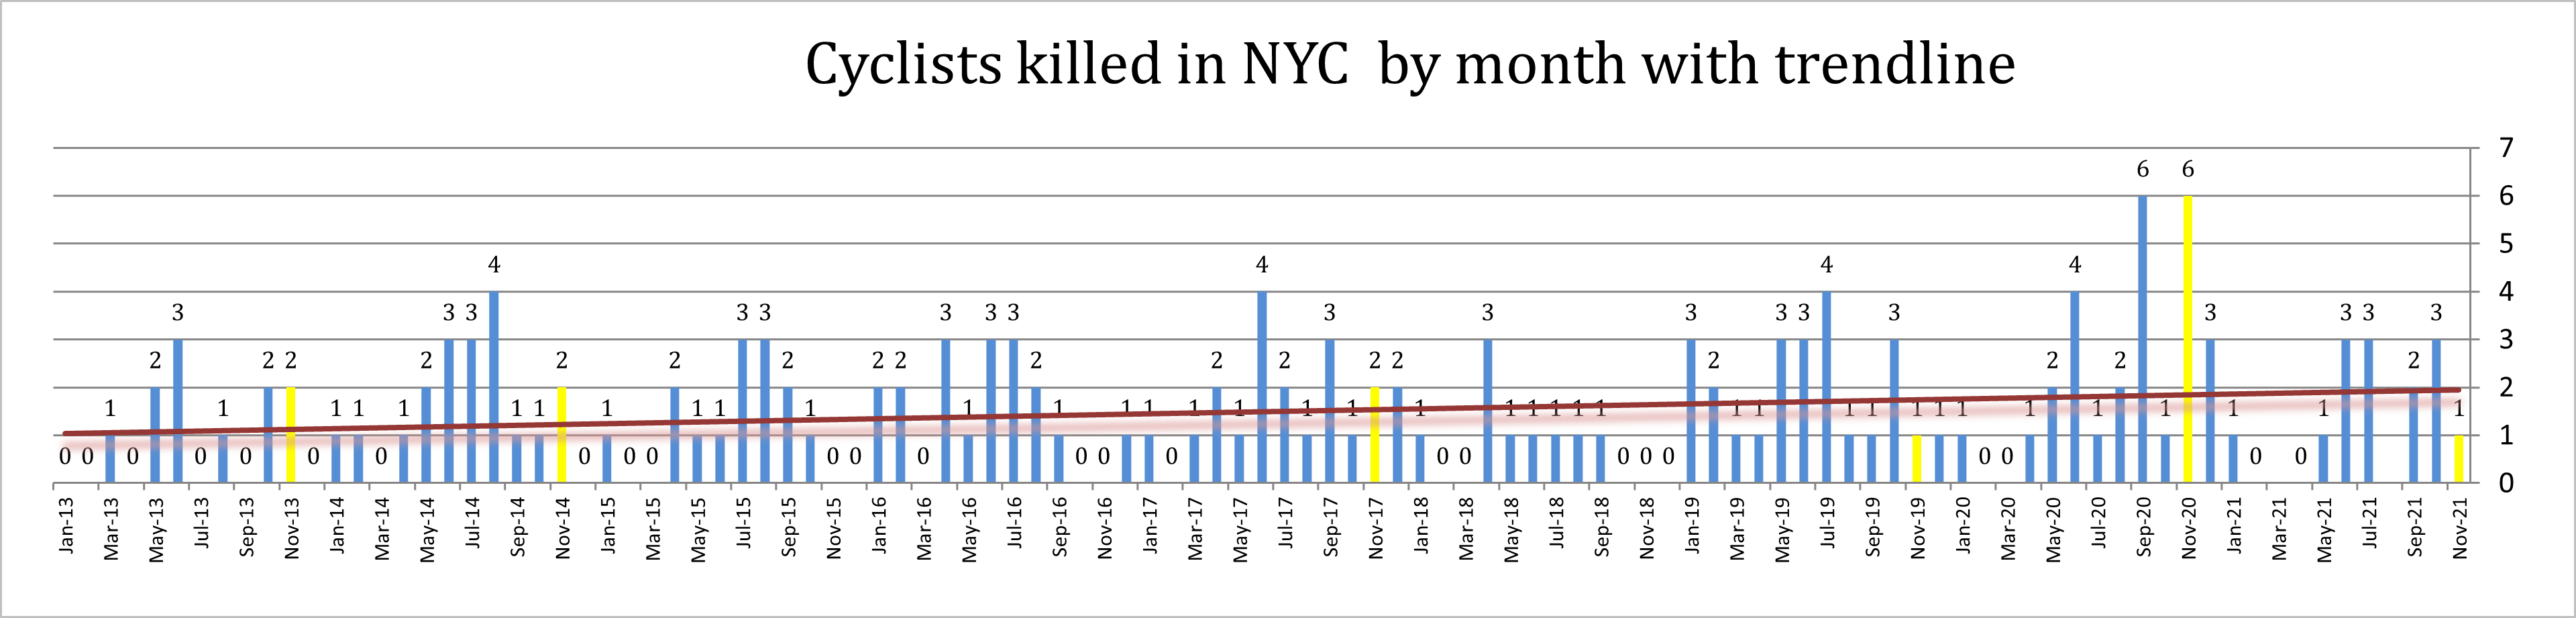 bicycle accident deaths NYC November 2021